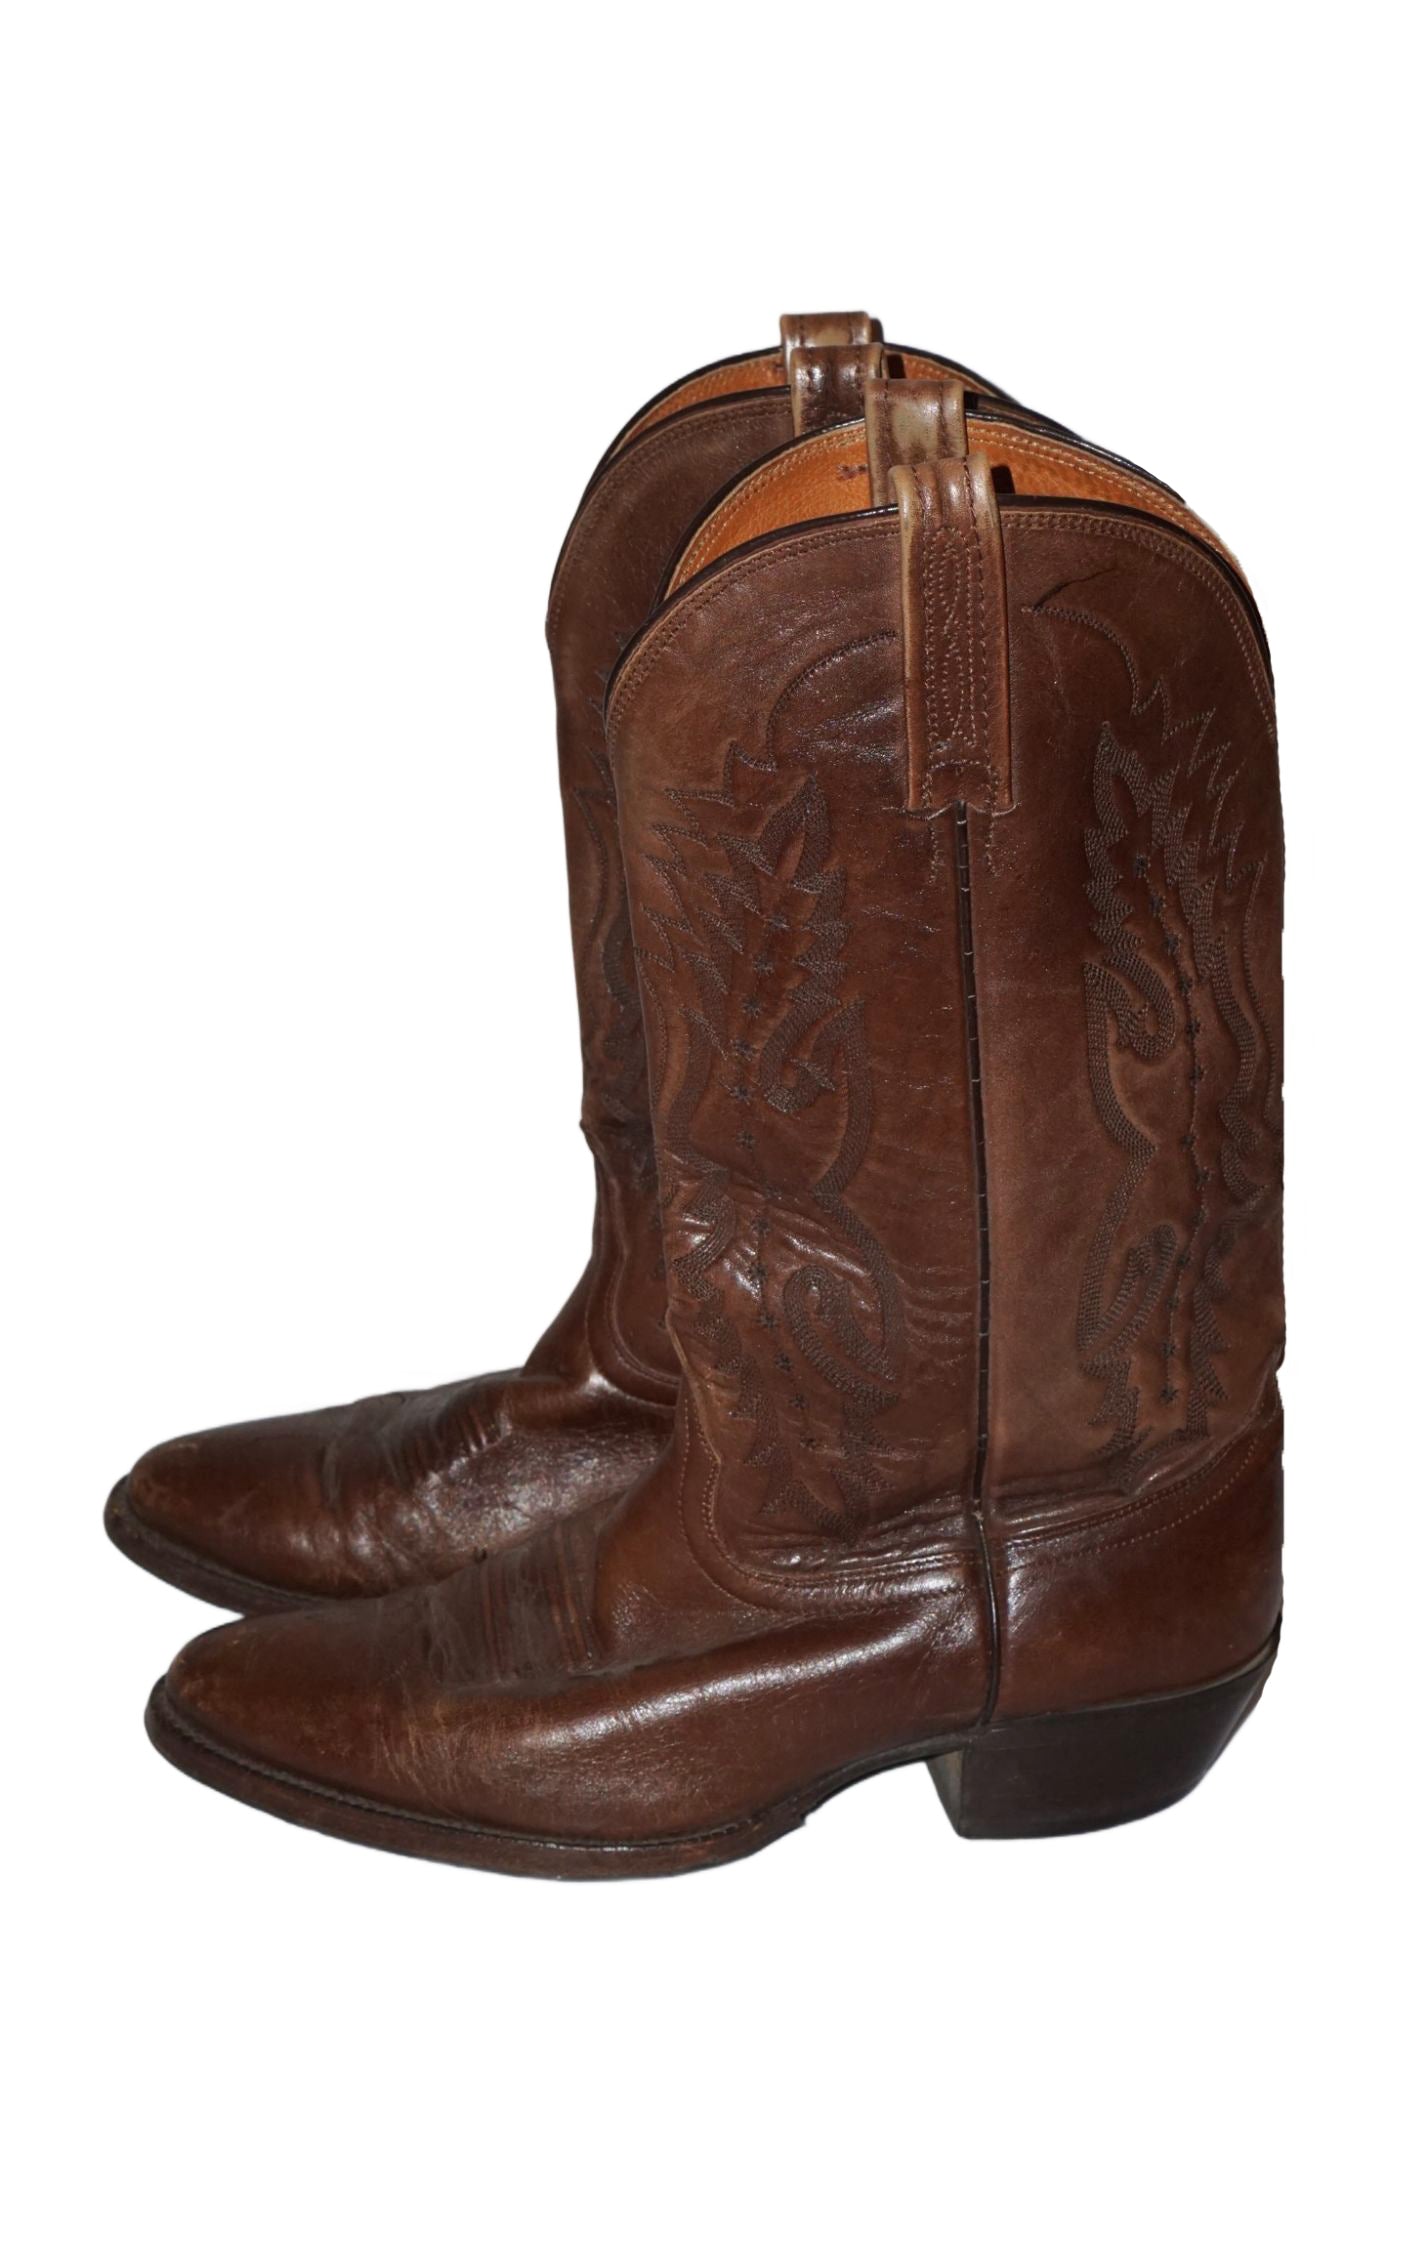 VINTAGE Nocona Brown Leather Western Cowboy Boots resellum